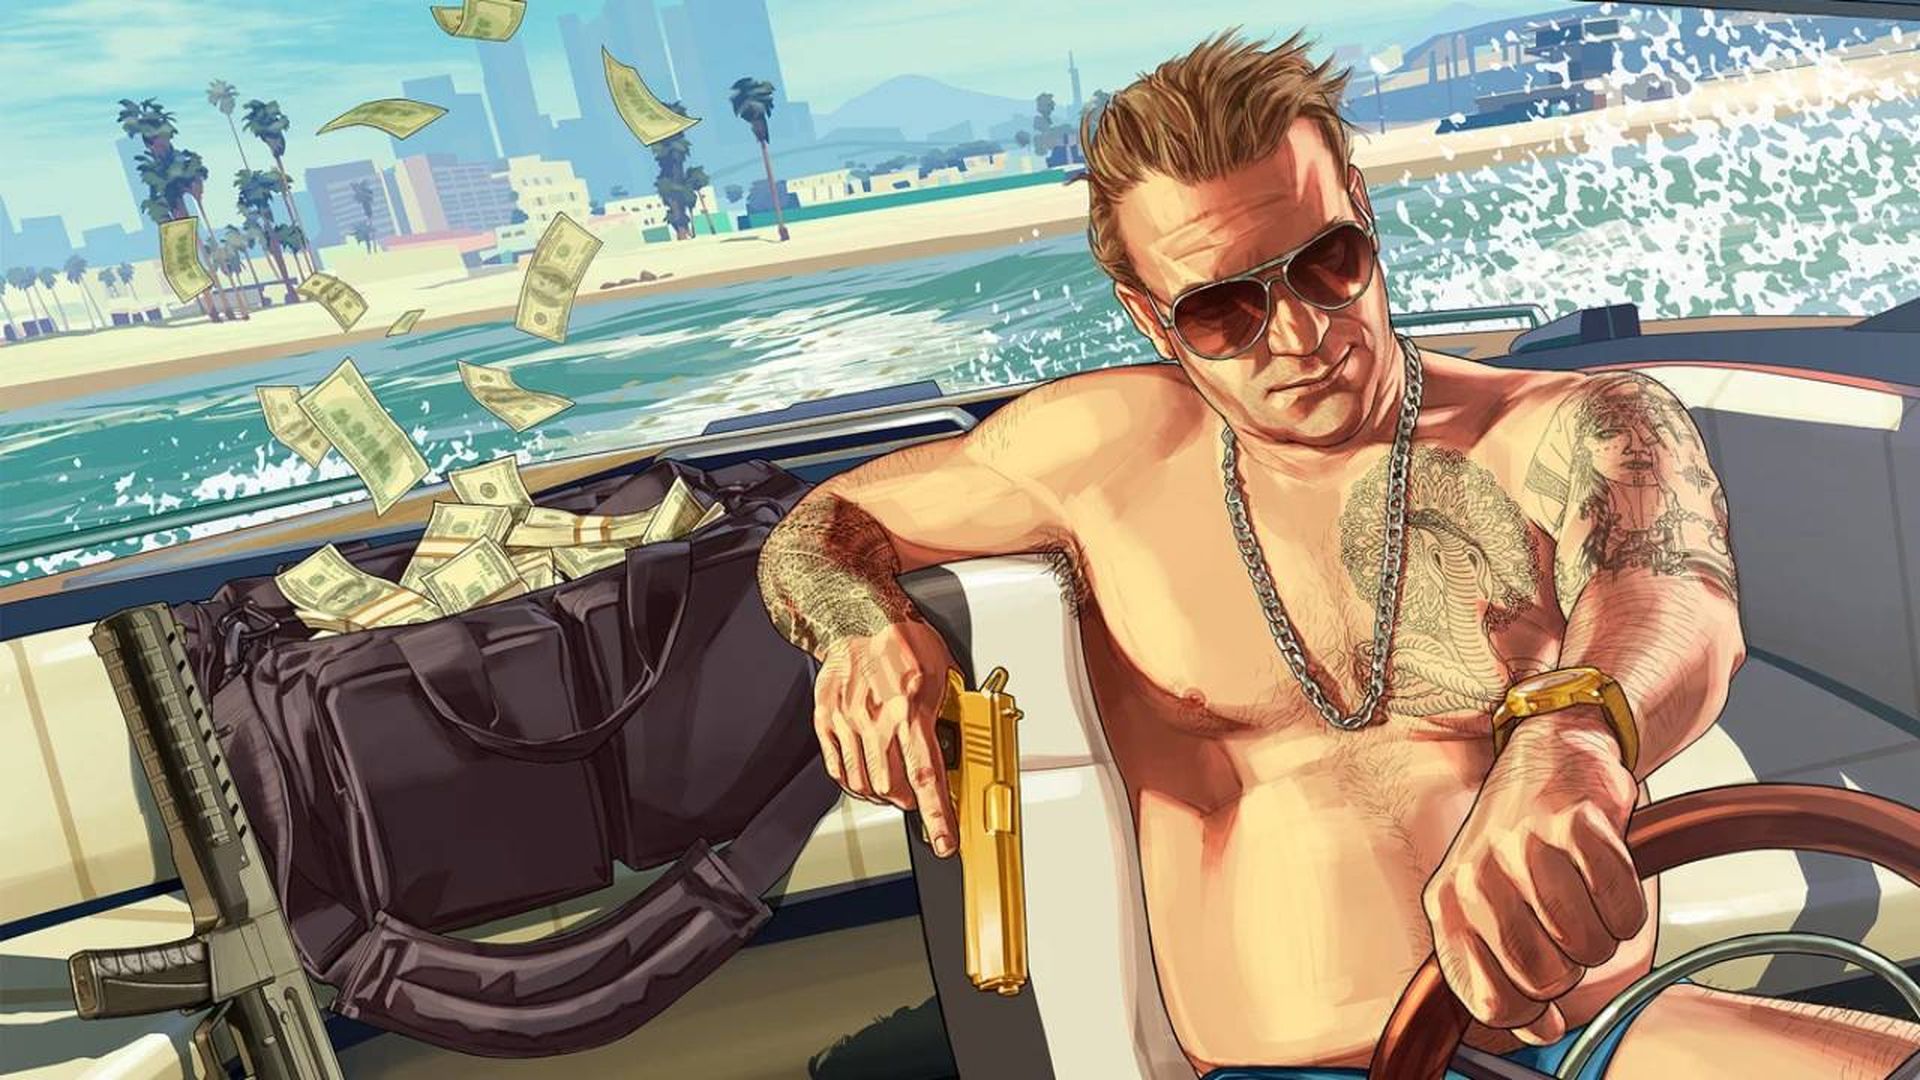 In this article, we are going to be covering the rumors on a GTA 6 female protagonist, which will be a first for the series if it comes to fruition.